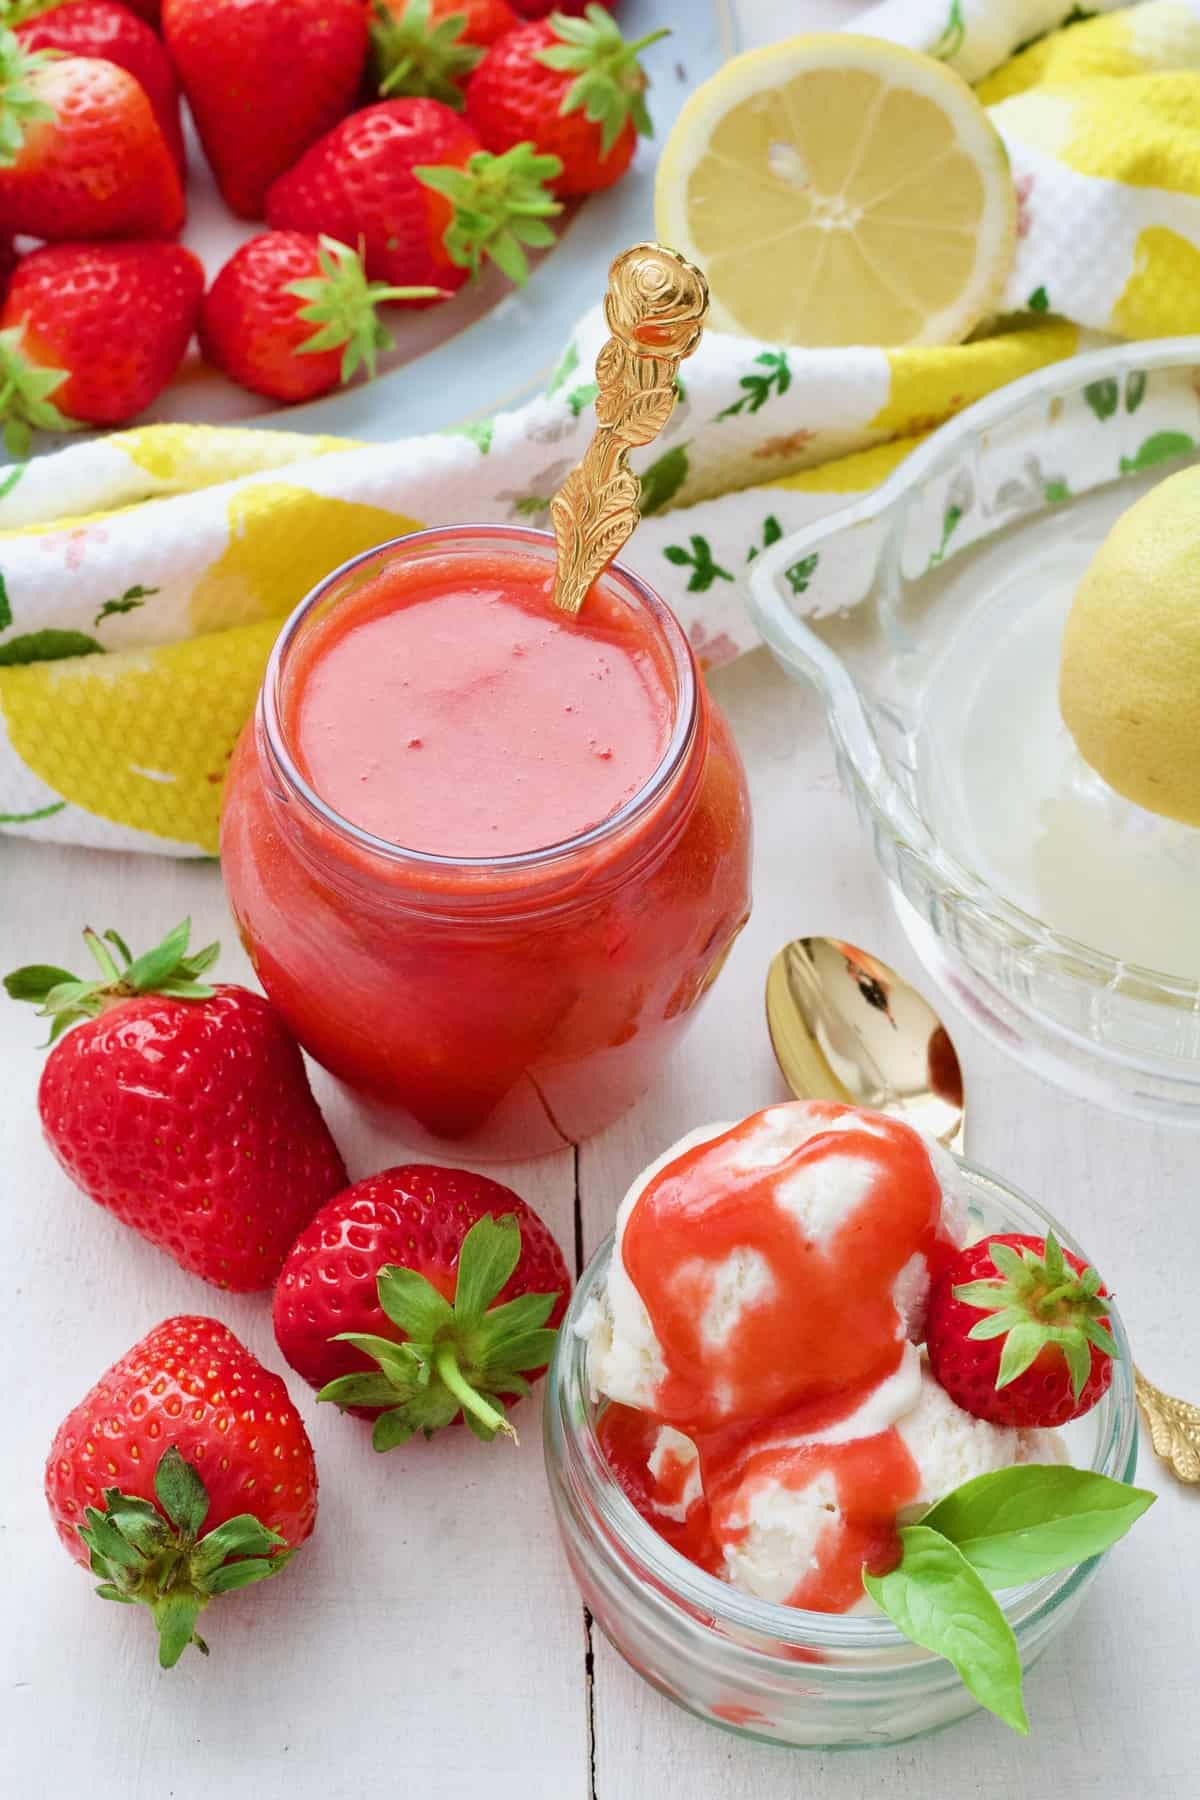 Coulis in a jar, ice cream and fresh strawberries.